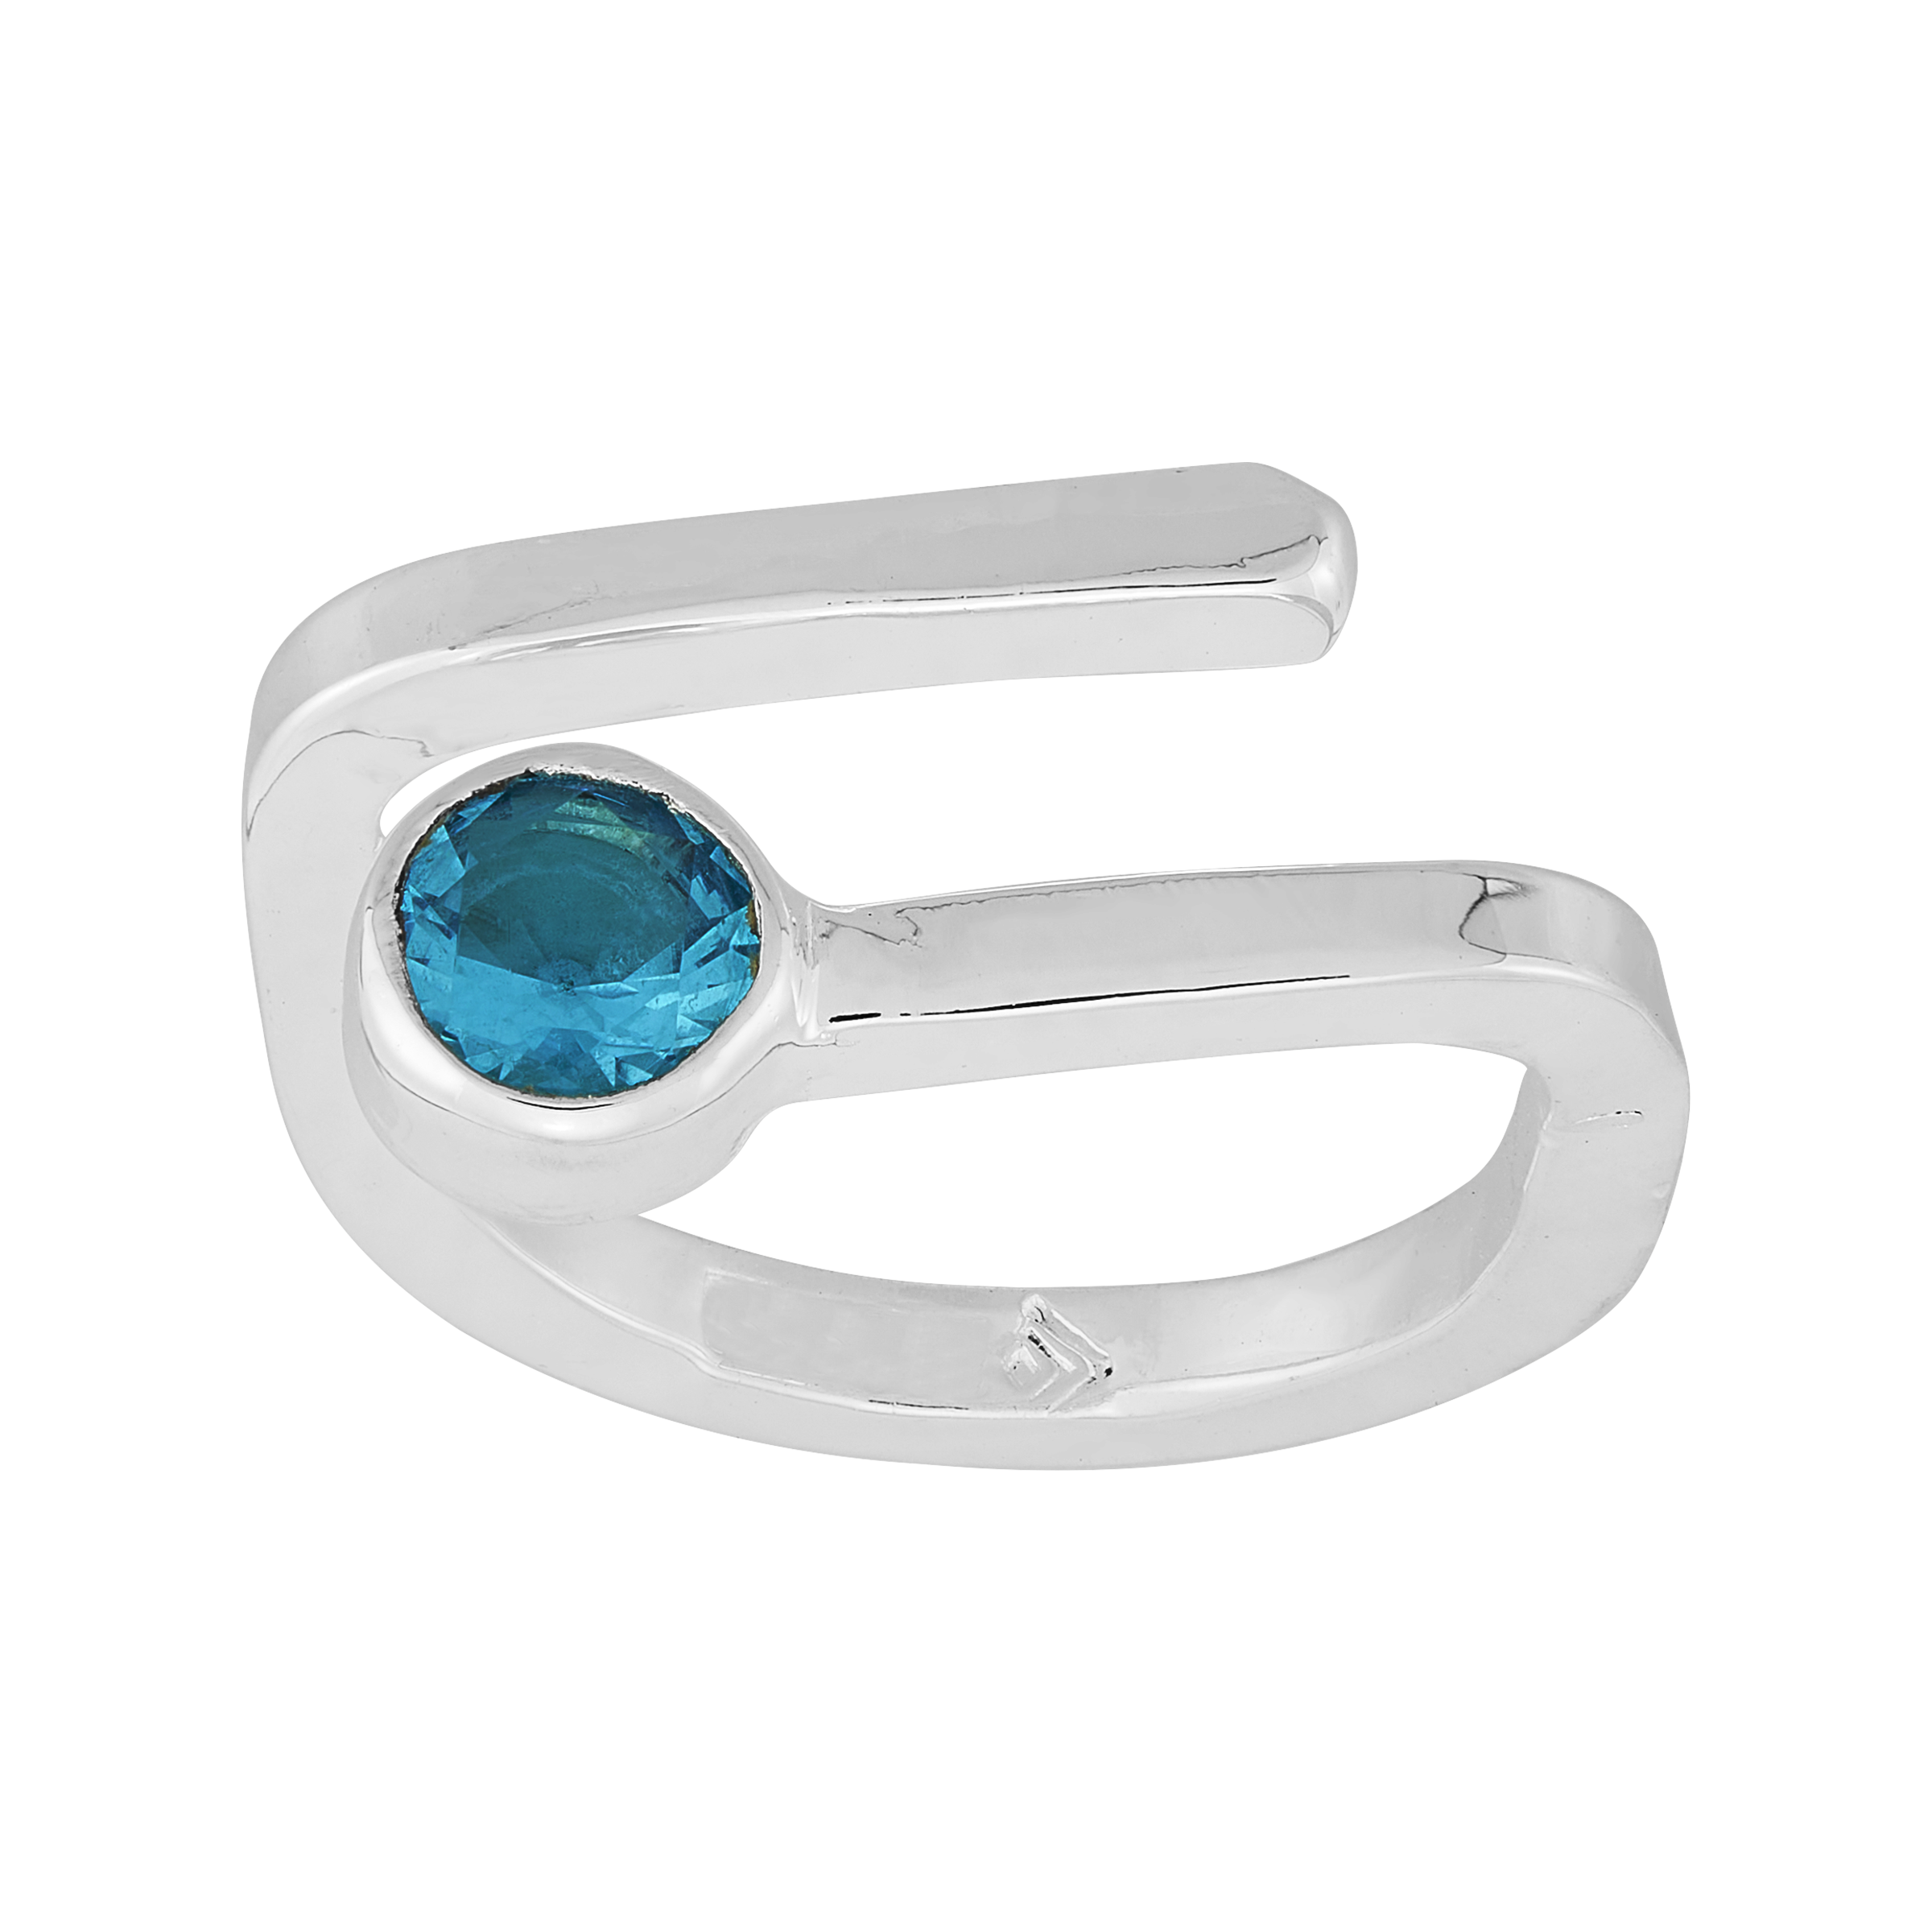 Space Blues Ring, Blue Cubic Zirconia